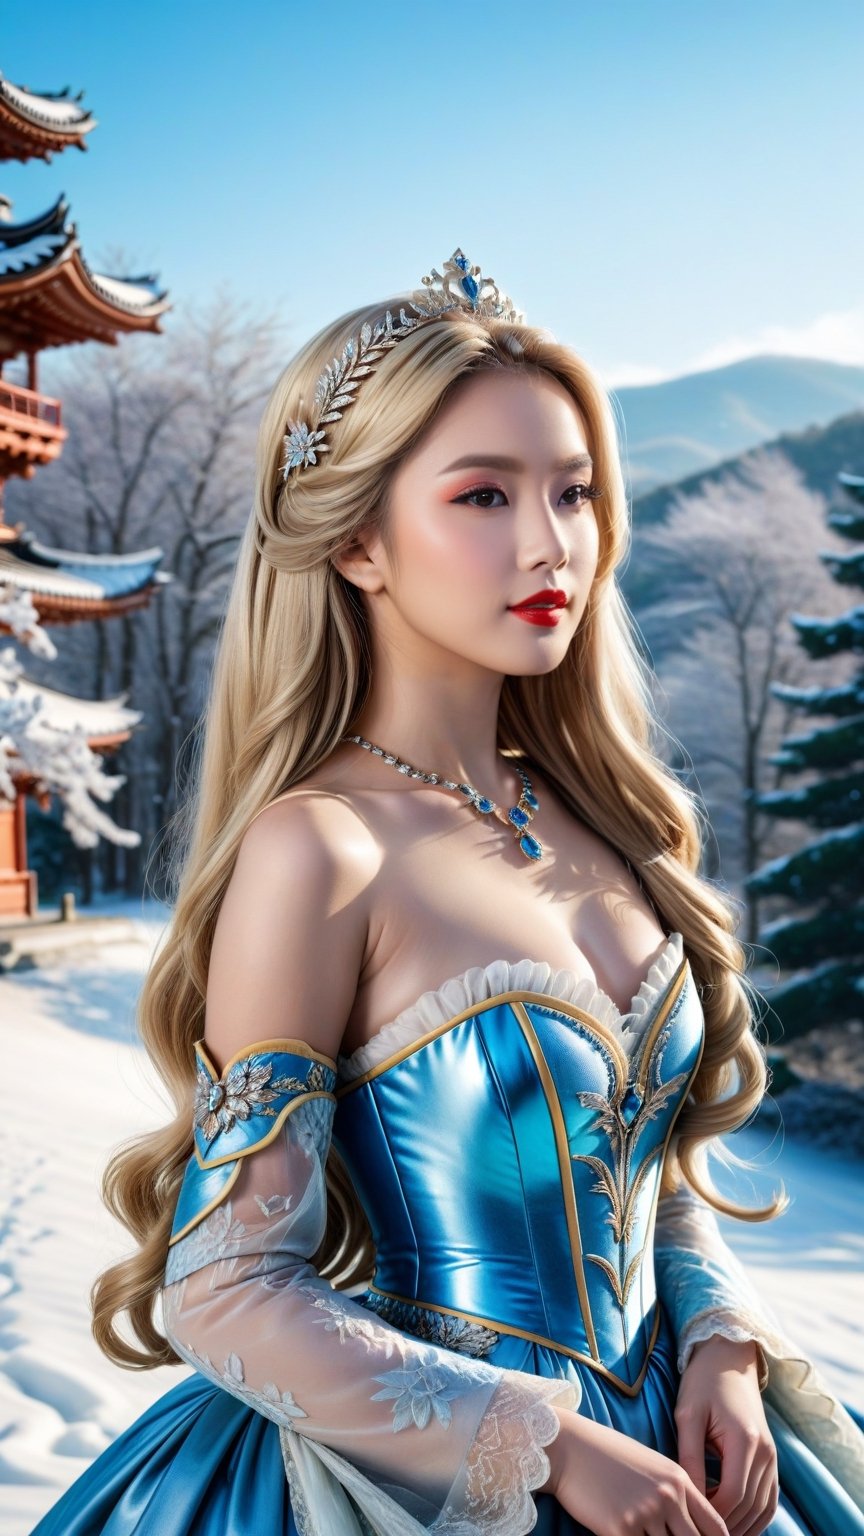 best quality, masterpiece,	
Amidst the winter wonderland of Japen, a beautiful girl with very long wavy blonde hair stands out against the snow-covered landscape, embodying the elegance of Rococo style. Her attire, a harmonious blend of the latest fashion trends and traditional Russian elements, dazzles with ornate jewelry that sparkles like the icy terrain around her. This enchanting scene, set against the backdrop of a quintessential Japen setting, showcases her as a modern-day princess, bridging the gap between the opulence of the past and the chic style of the present.
ultra realistic illustration, siena natural ratio, ultra hd, realistic, vivid colors, highly detailed, UHD drawing, perfect composition, ultra hd, 8k, he has an inner glow, stunning, something that even doesn't exist, mythical being, energy, molecular, textures, iridescent and luminescent scales, breathtaking beauty, pure perfection, divine presence, unforgettable, impressive, breathtaking beauty, Volumetric light, auras, rays, vivid colors reflects.,science fiction,photo r3al,Ye11owst0ne,DonMM1y4XL,Masterpiece,koh_yunjung